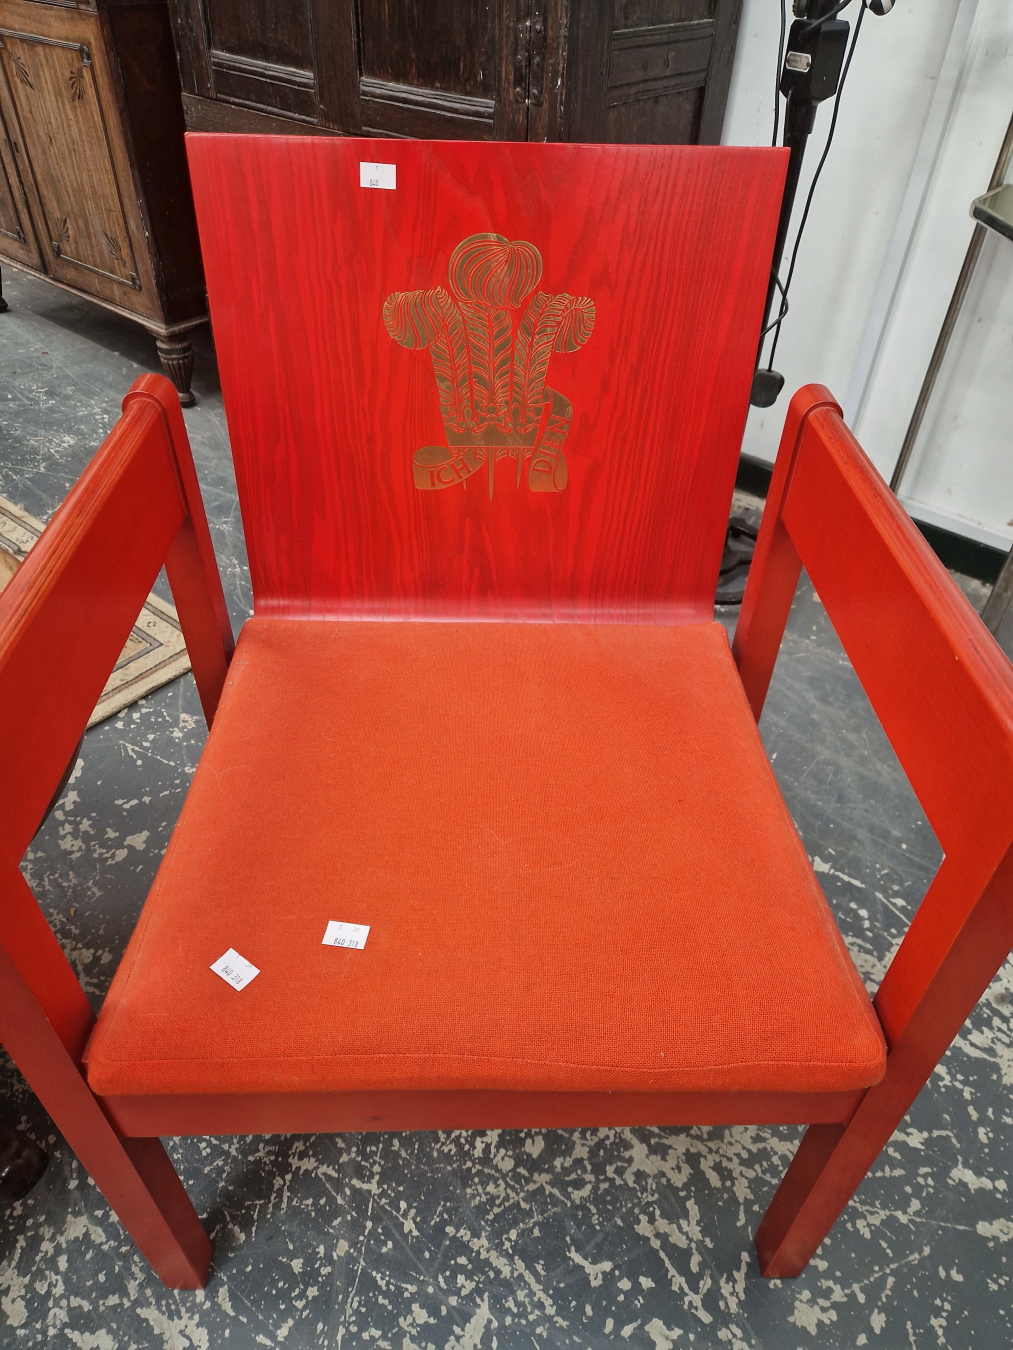 A 1969 PRINCE OF WALES INVESTITURE CHAIR - Image 2 of 3